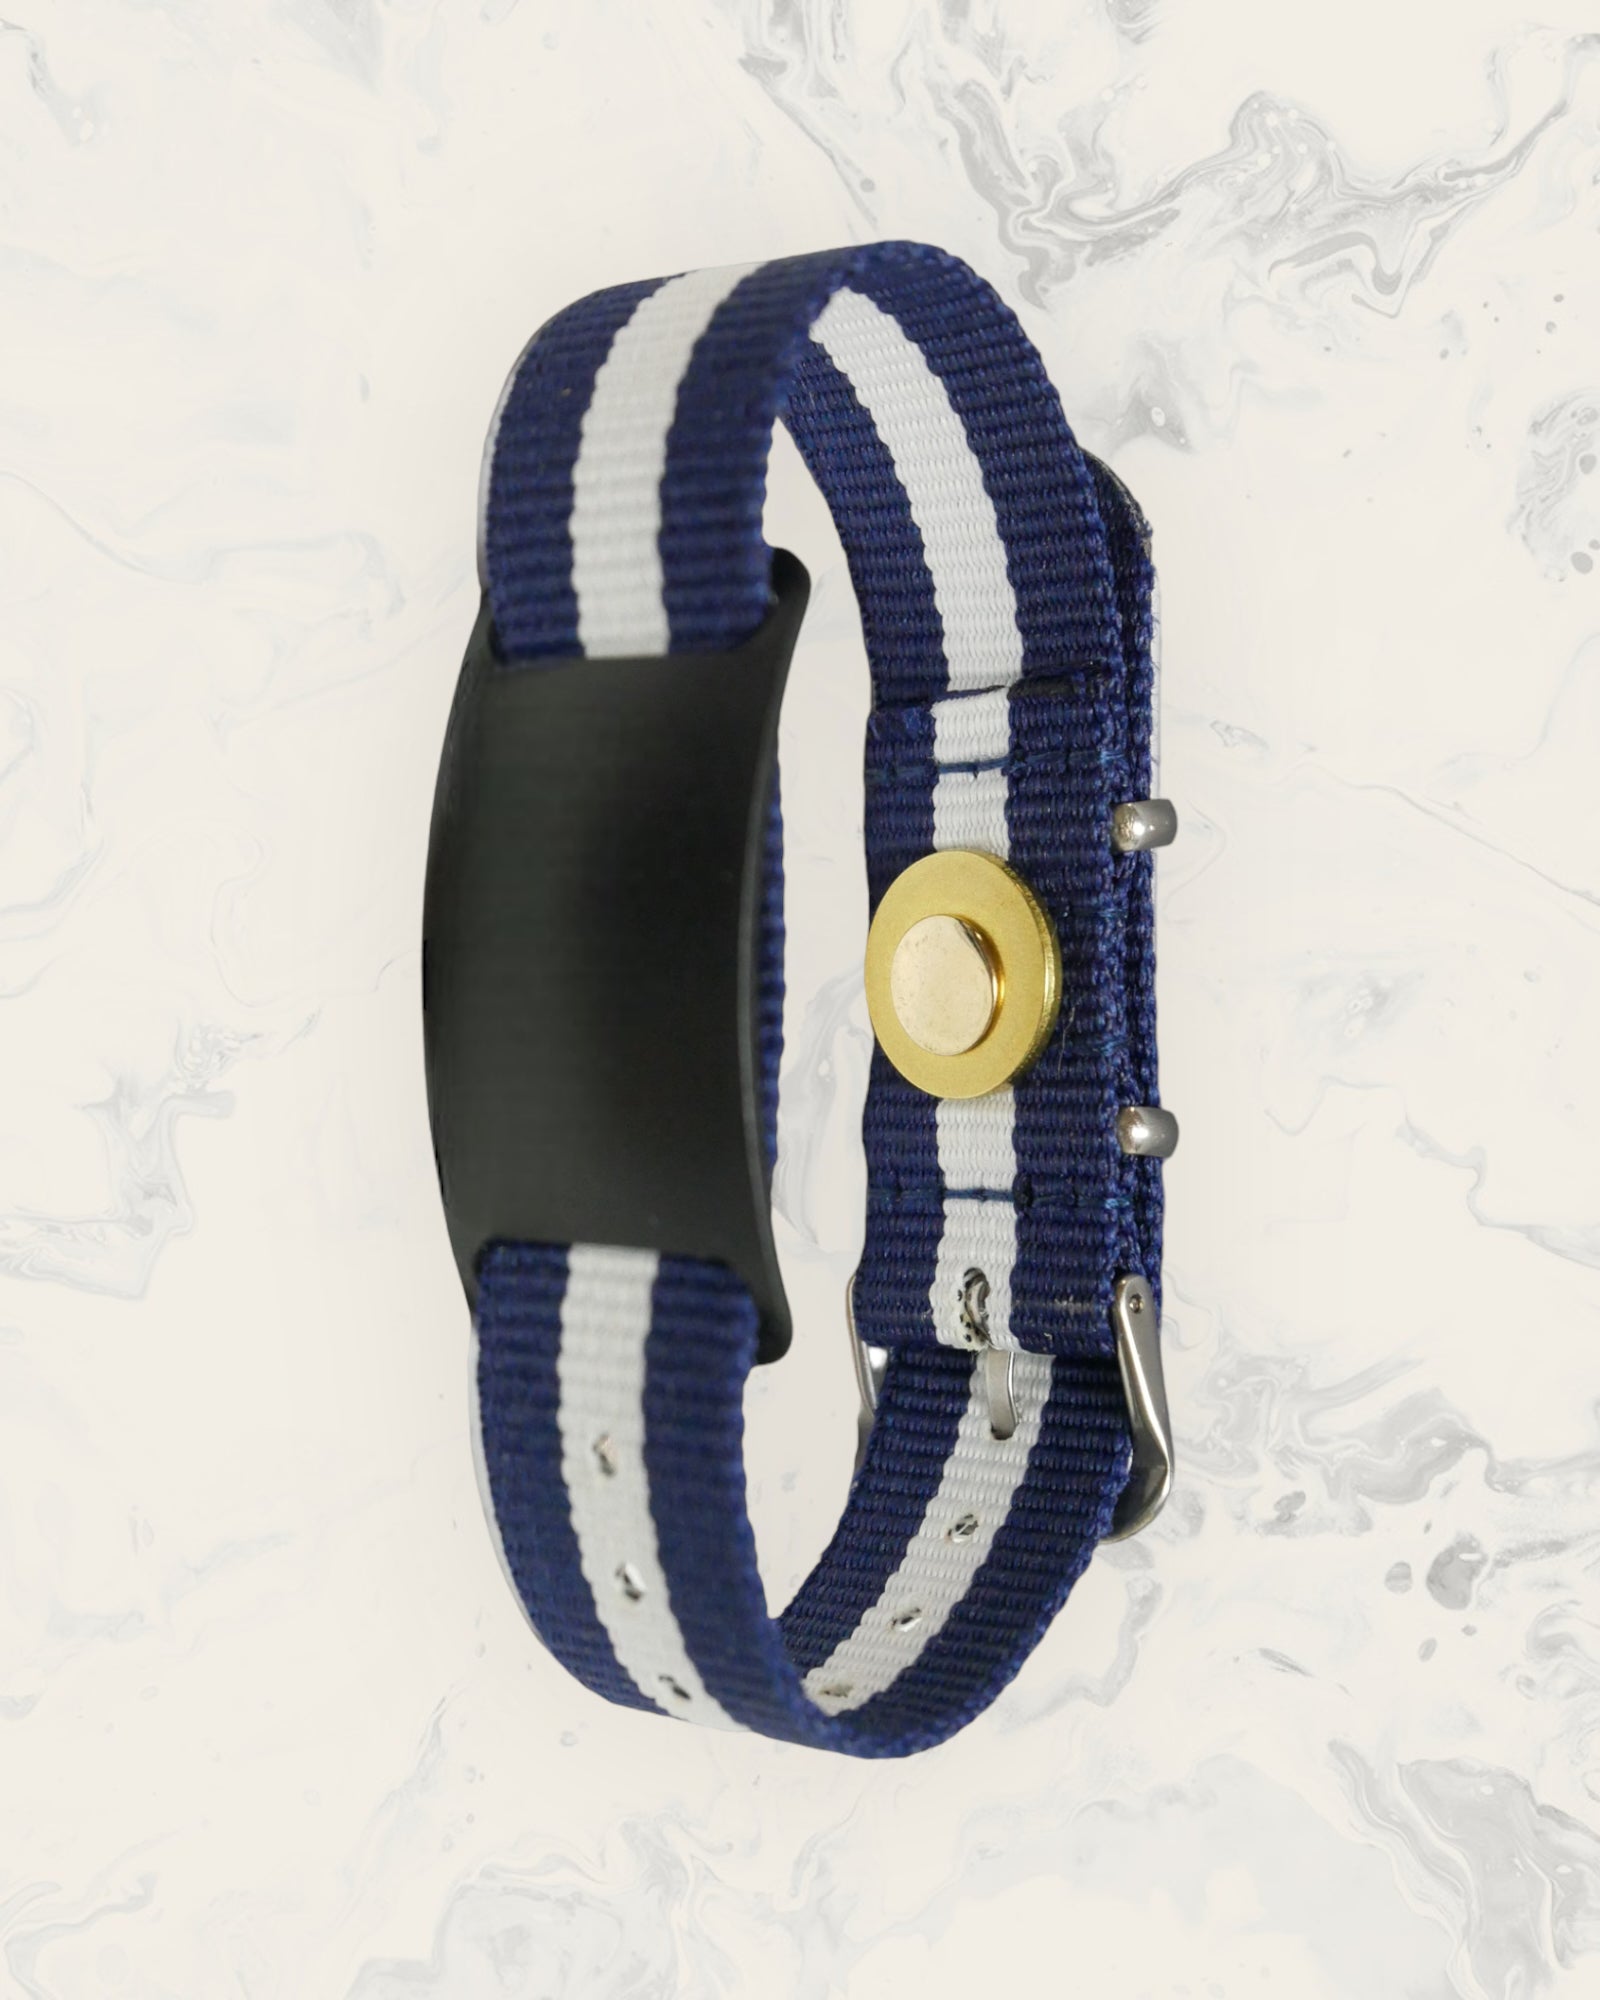 Natural Pain Relief and EMF Protection Bracelet Nylon Band Color Navy Blue and White Striped with a Black Slider